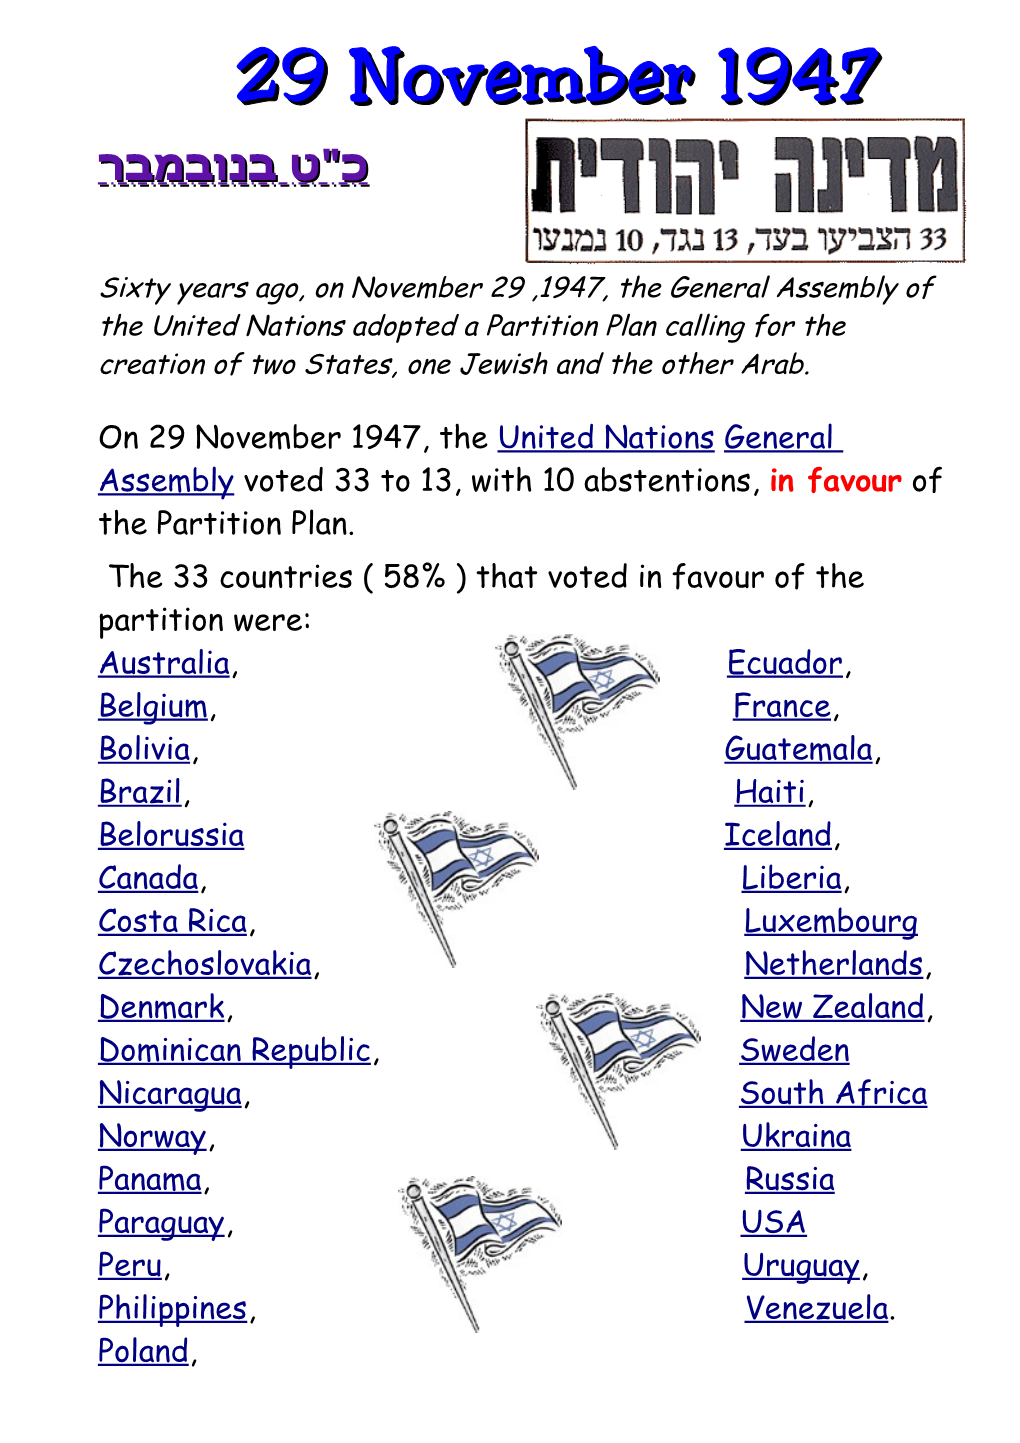 29 November 1947, the United Nations General Assembly Voted 33 to 13, with 10 Abstentions, in Favour of the Partition Plan